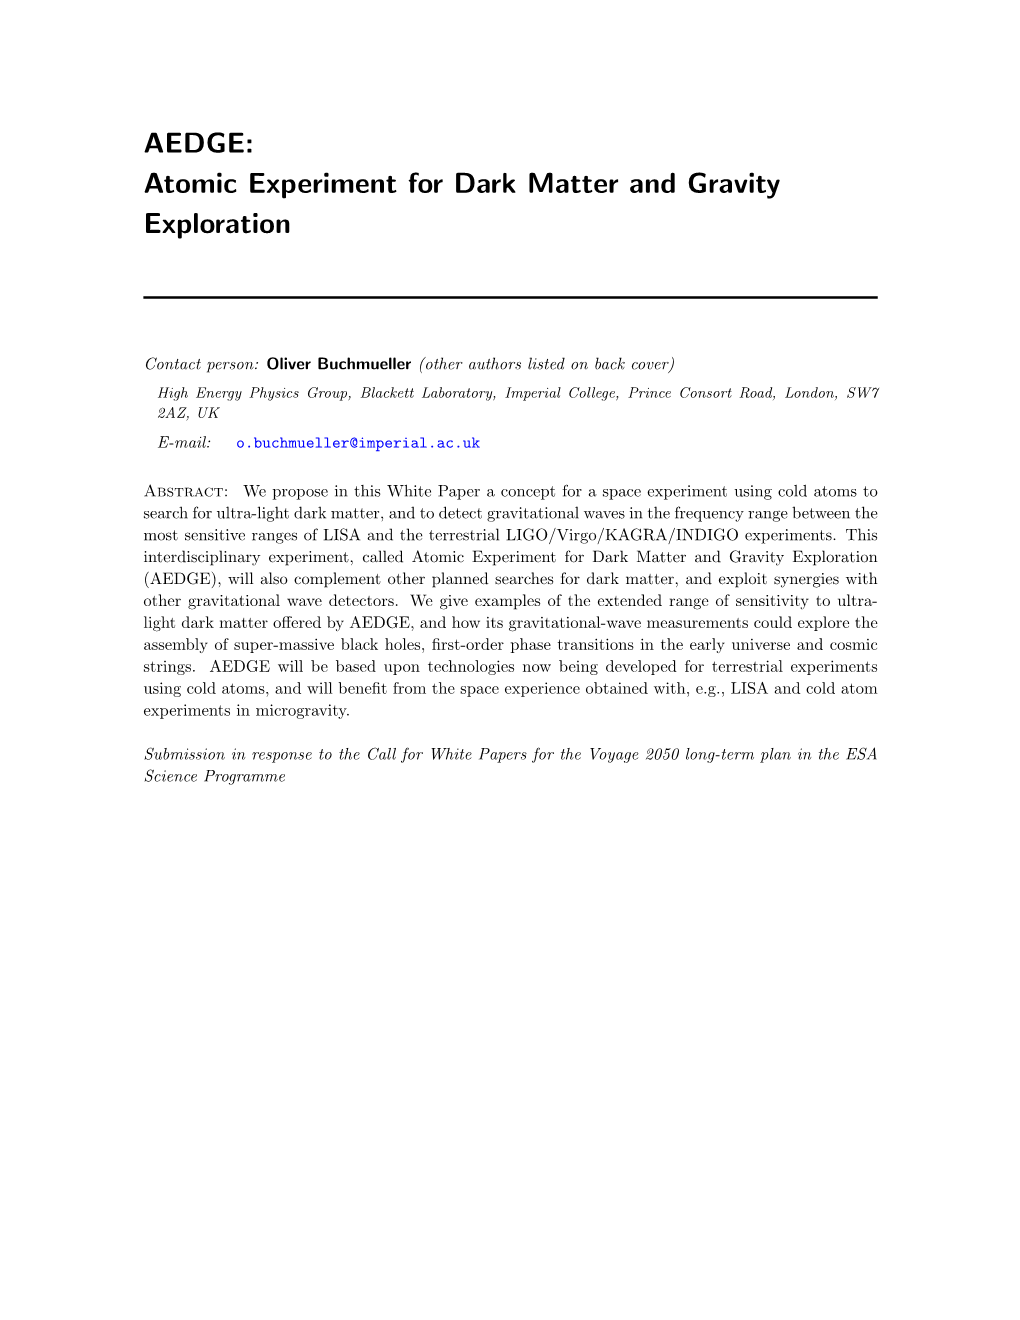 AEDGE: Atomic Experiment for Dark Matter and Gravity Exploration